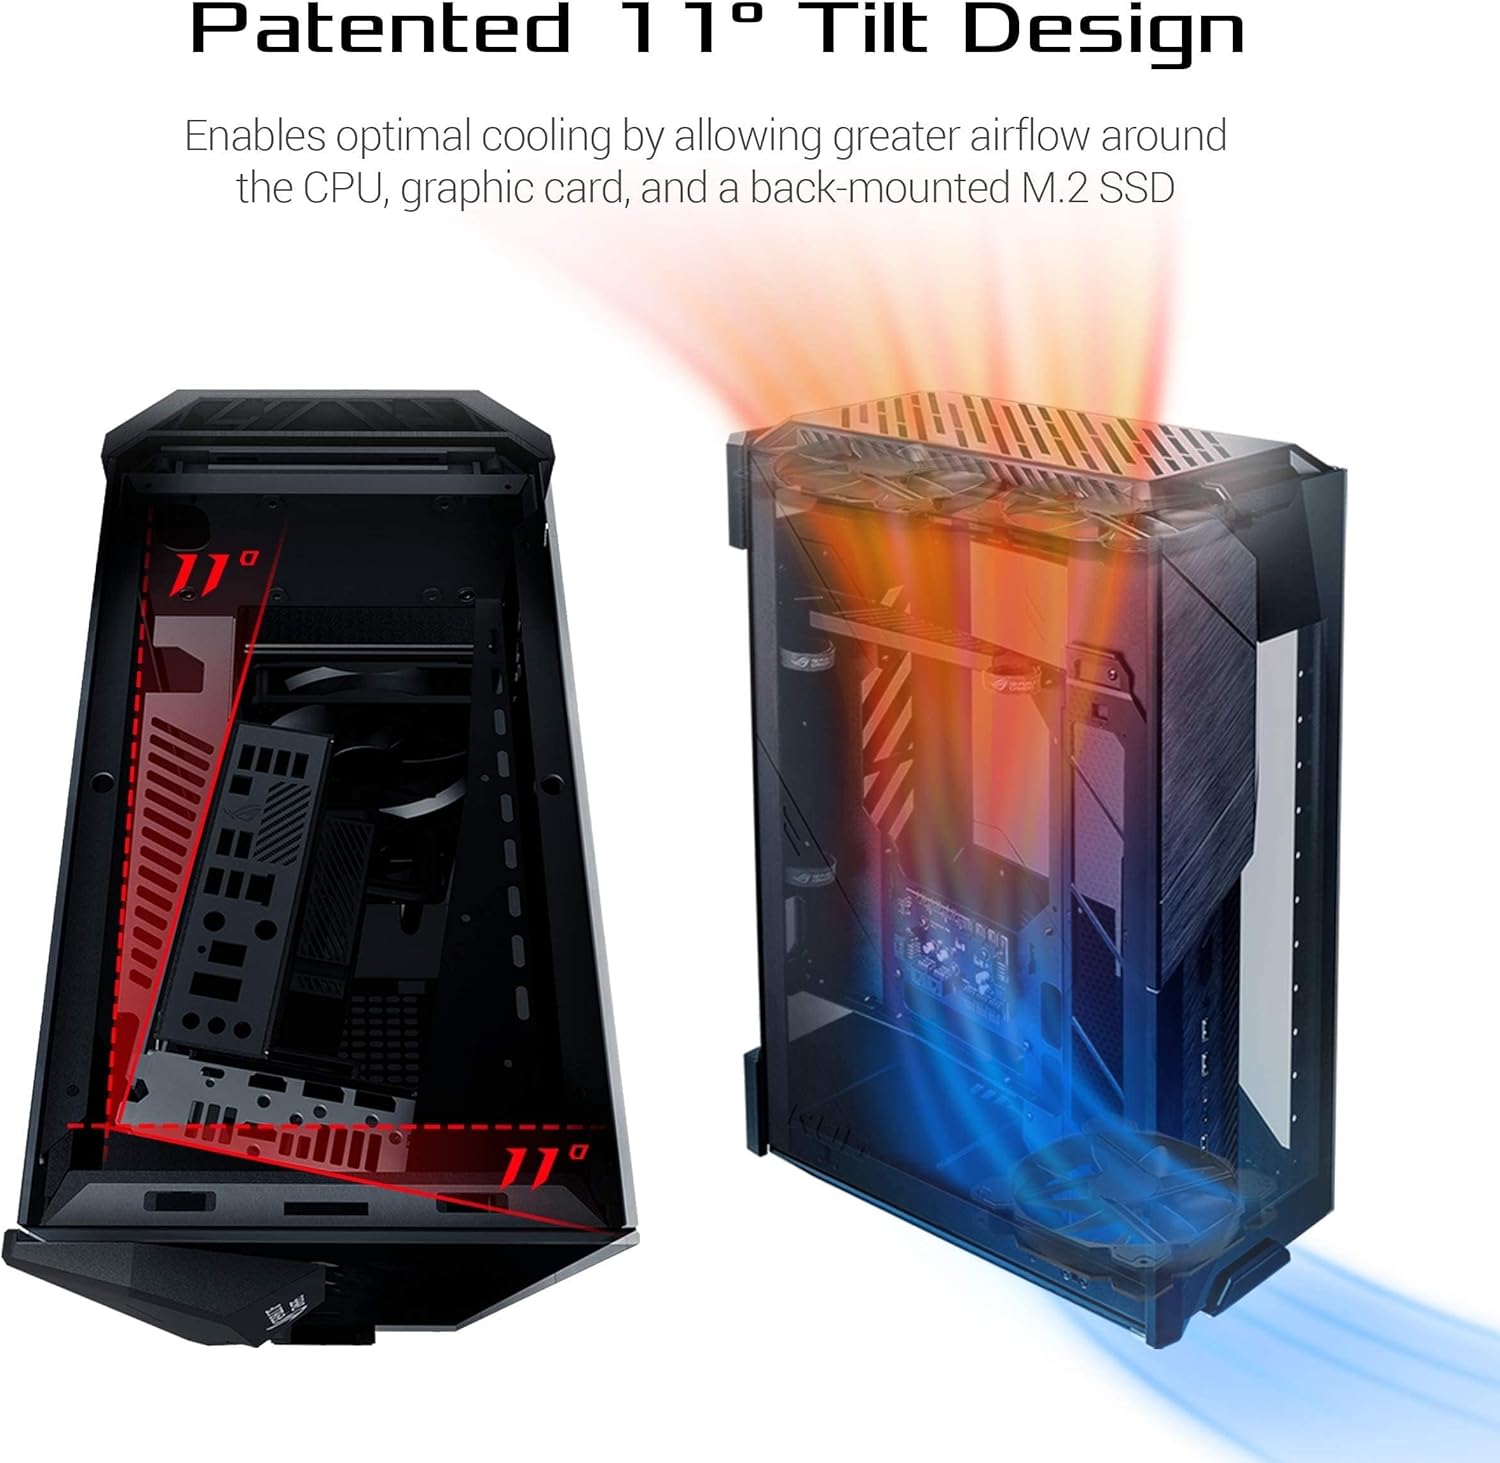 ASUS GR101 ROG Z11 Mini-ITX/DTX with Patented 11° Tilt Design ATX Gaming Case